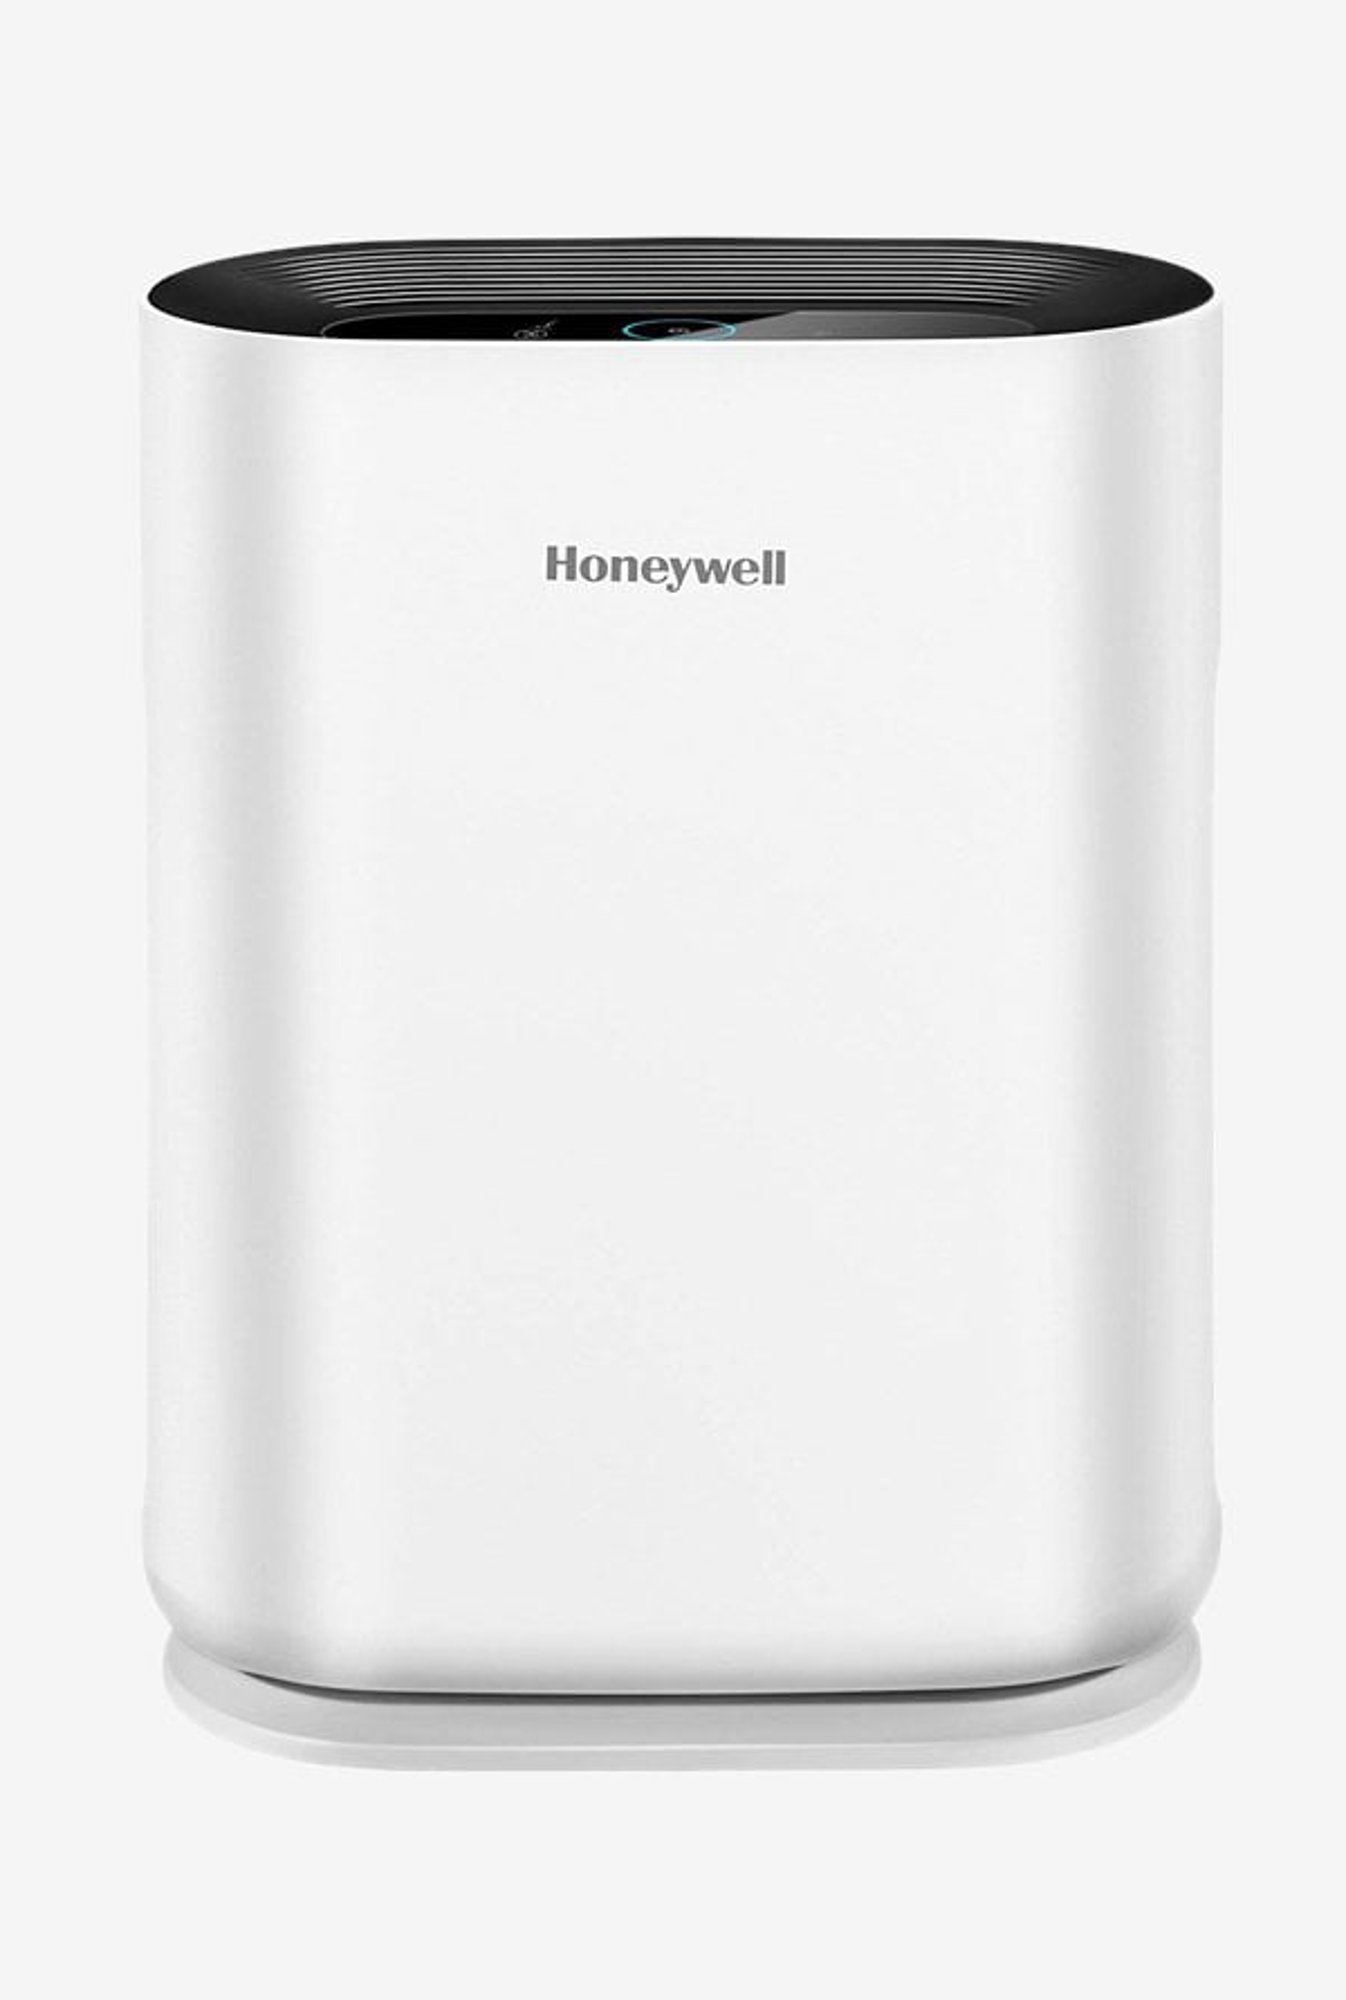 Honeywell hac25m1201w review